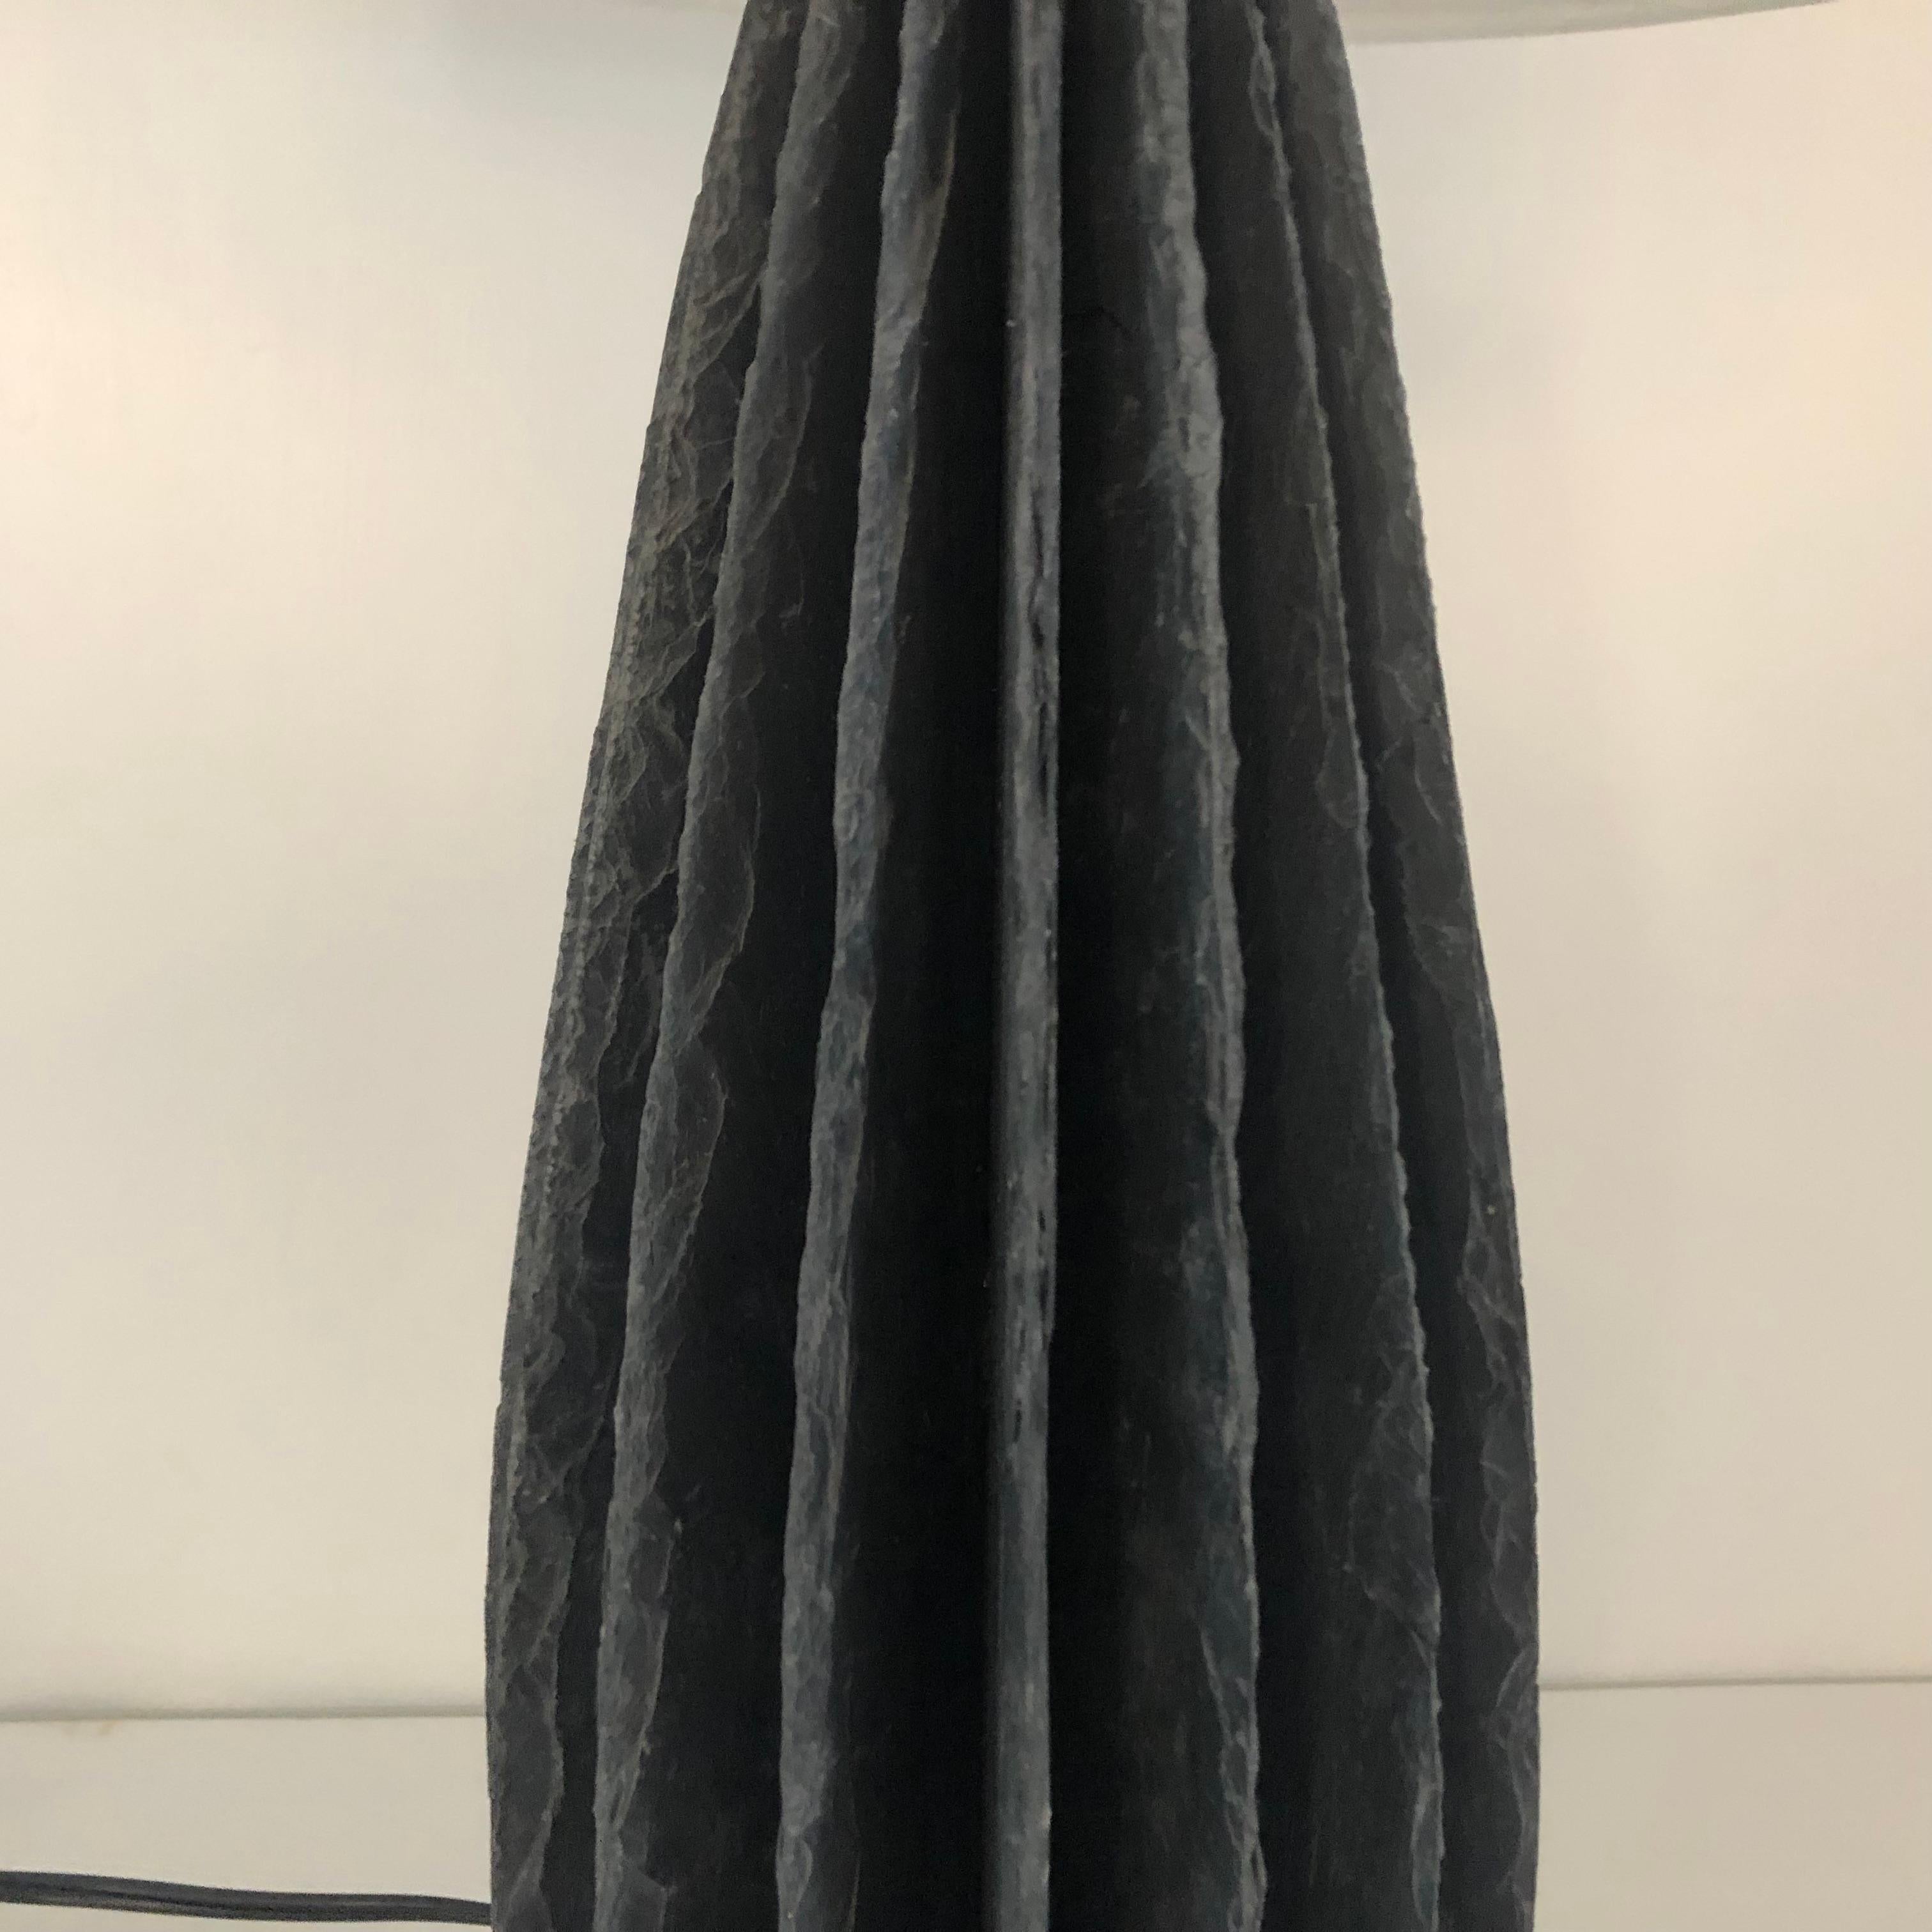 The lamp base is hand crafted using several individually carved sections of blue stone slate, each section is then set on the vertical in a fan like configuration creating the sculptural lamp base. This 